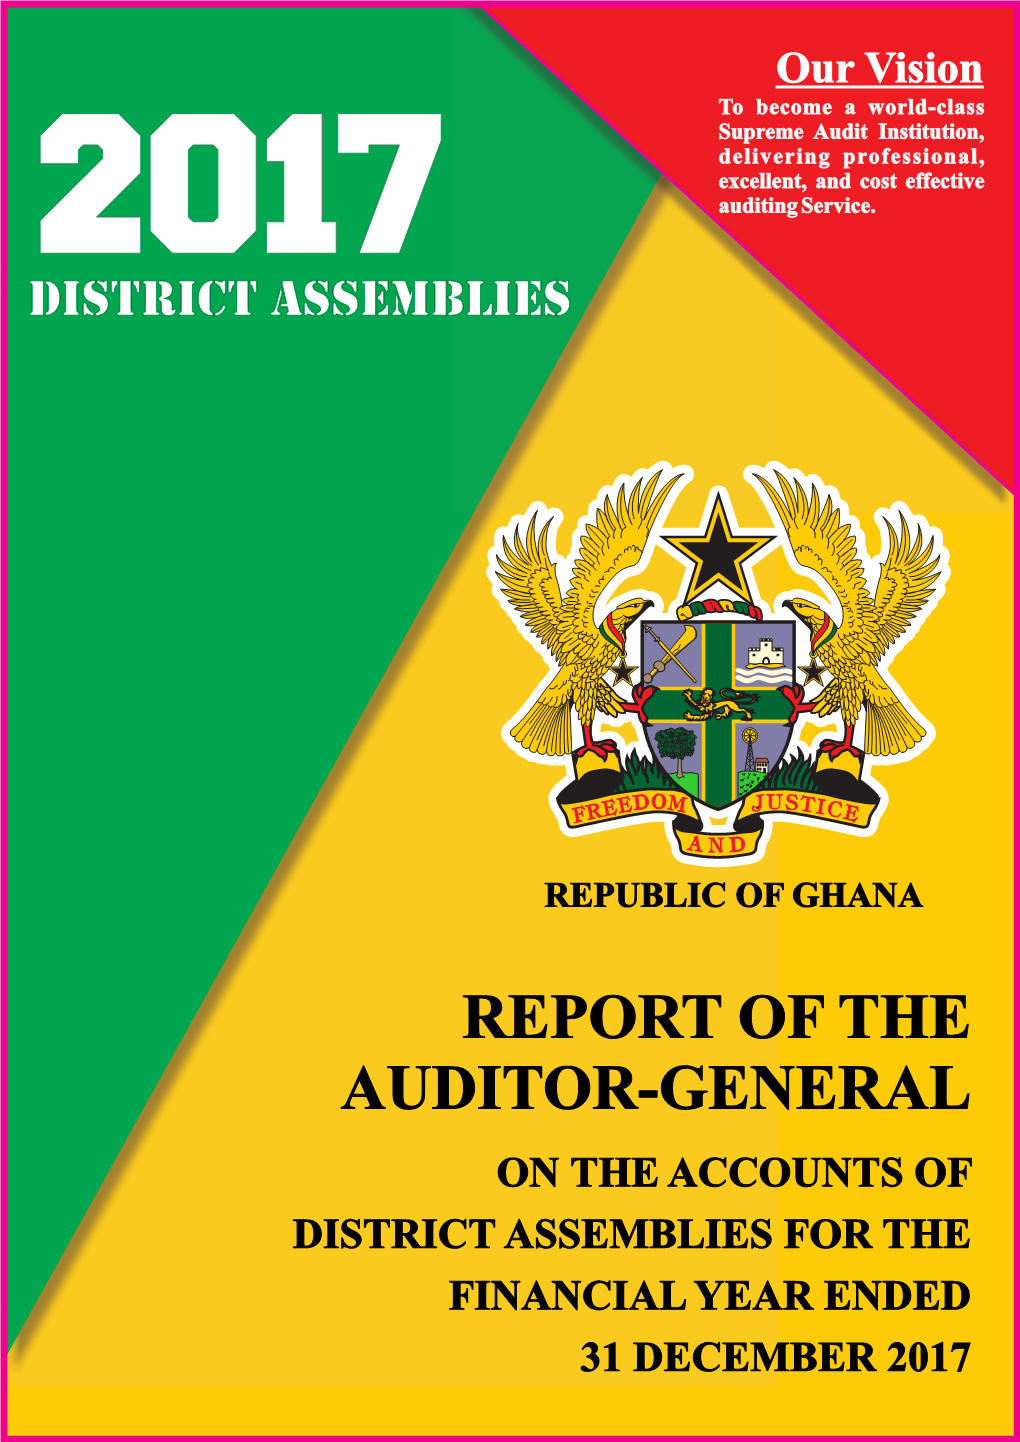 Report of the Auditor General on the Accounts of District Assemblies